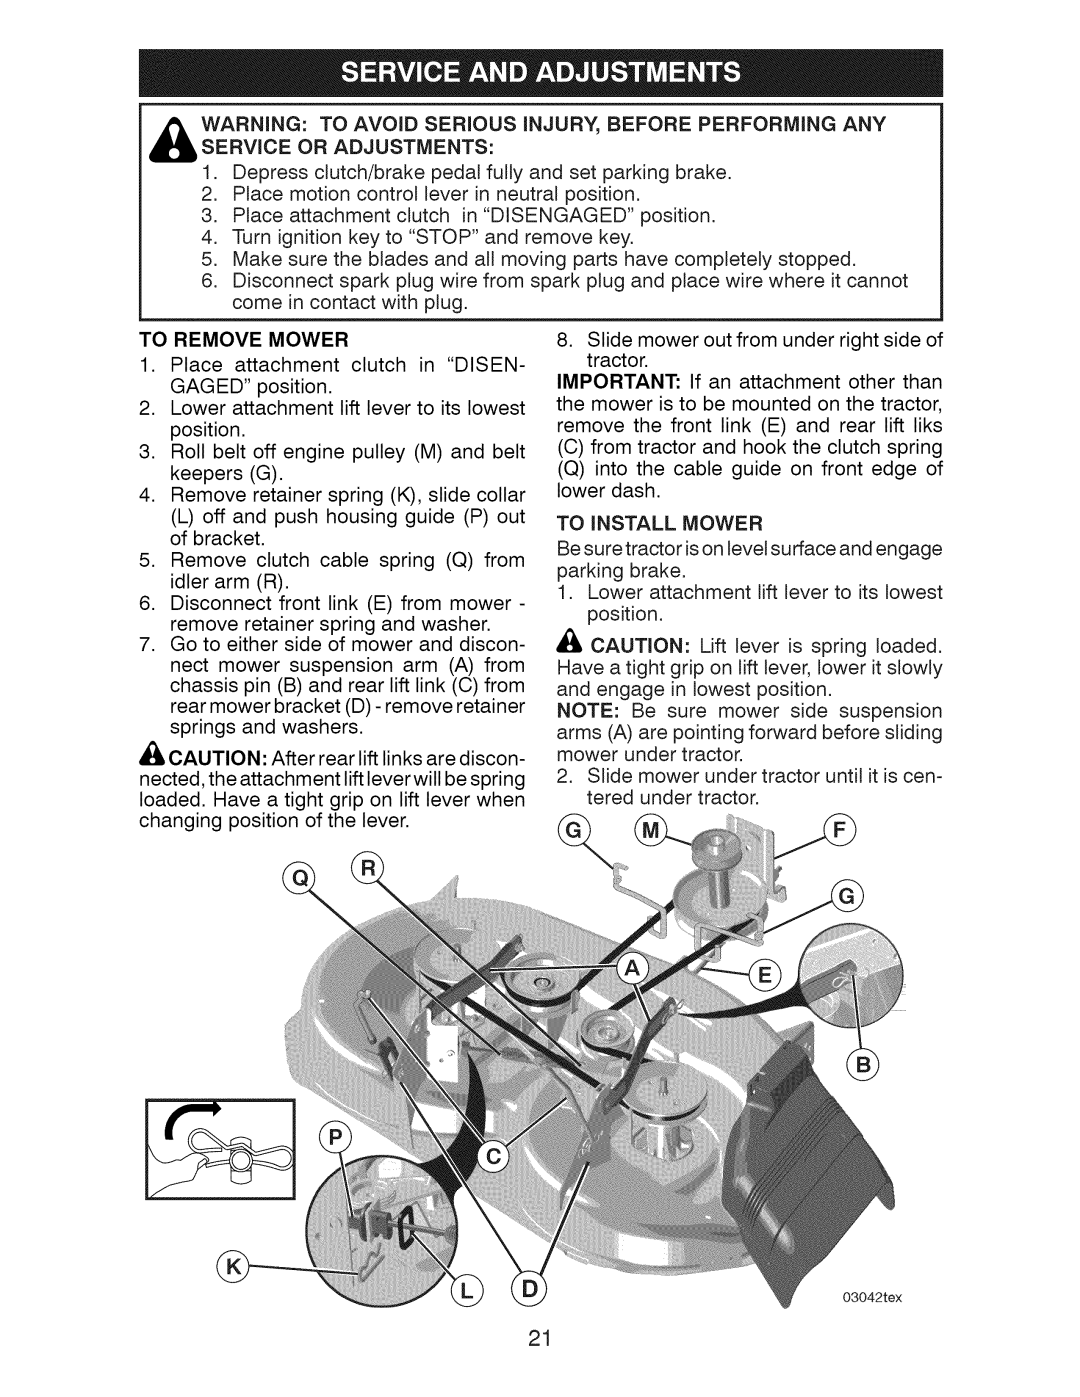 Craftsman 917.28922 owner manual To Remove Mower, To Install Mower 